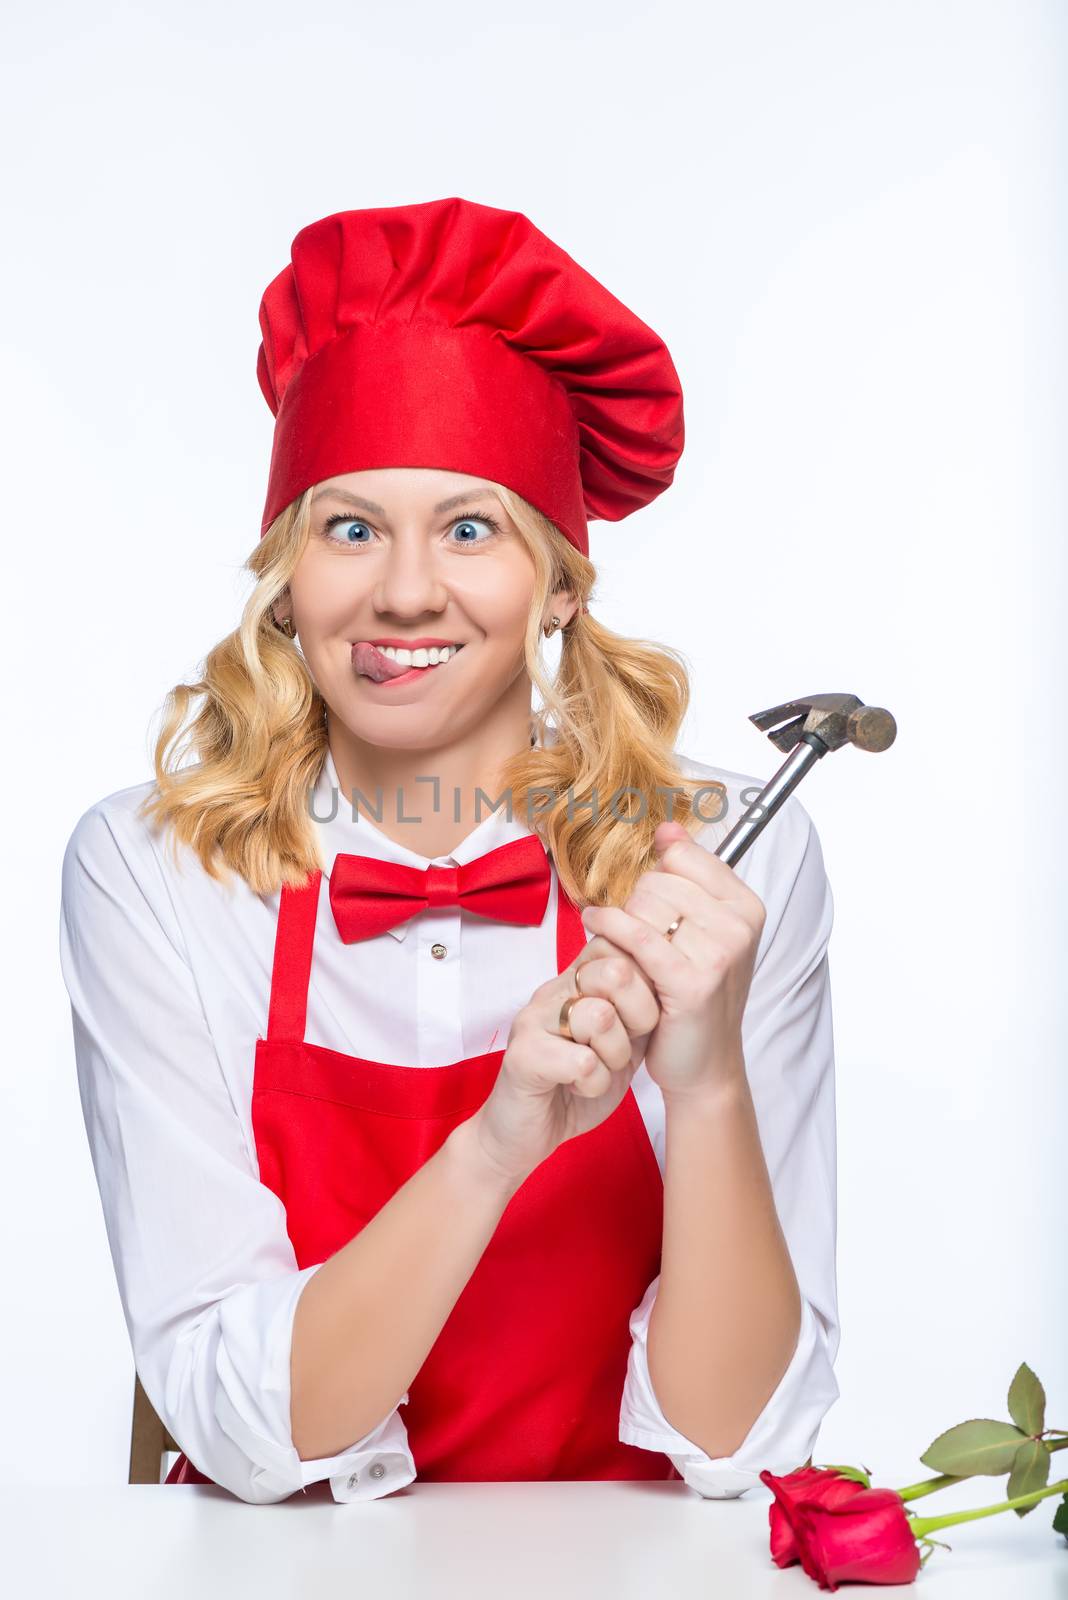 Crazy woman cook with hammer on white background isolated portrait